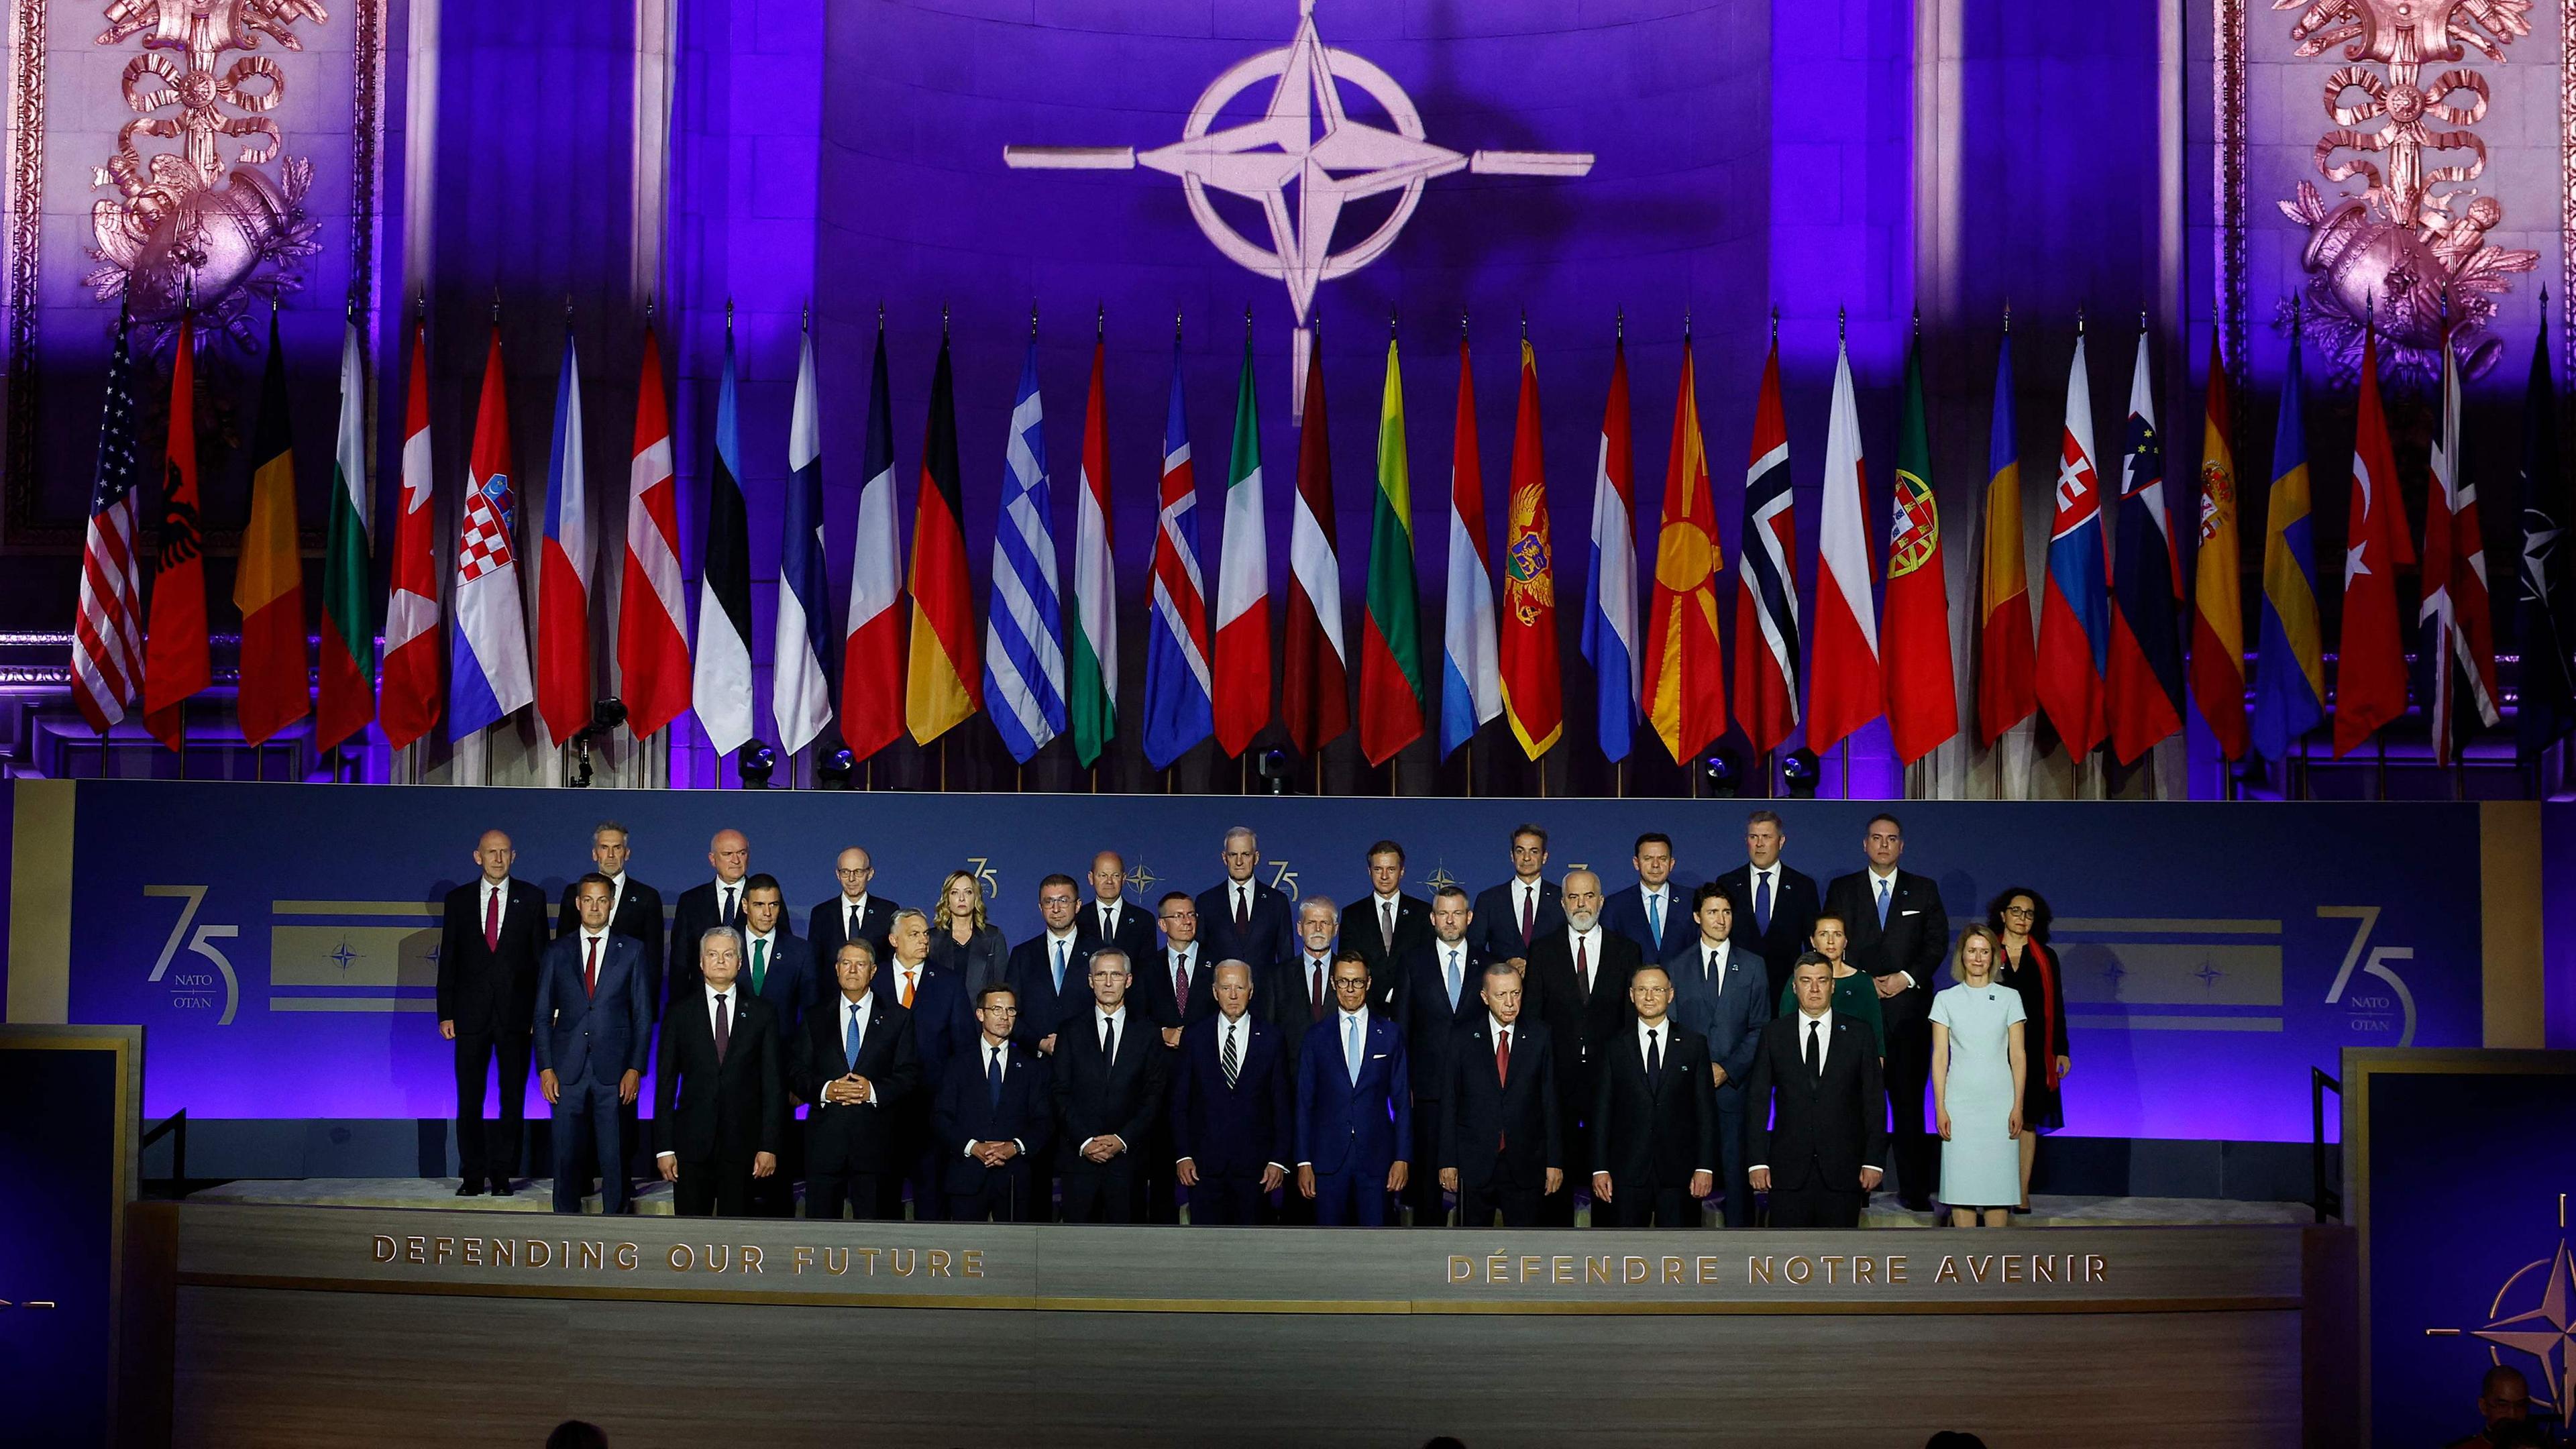 WASHINGTON, DC - JULY 10: Heads of state pose for a group photo during the NATO 75th anniversary celebratory event at the Andrew Mellon Auditorium on July 9, 2024 in Washington, DC. NATO leaders convene in Washington this week for its annual summit to discuss their future strategies and commitments, and mark the 75th anniversary of the alliance_s founding.